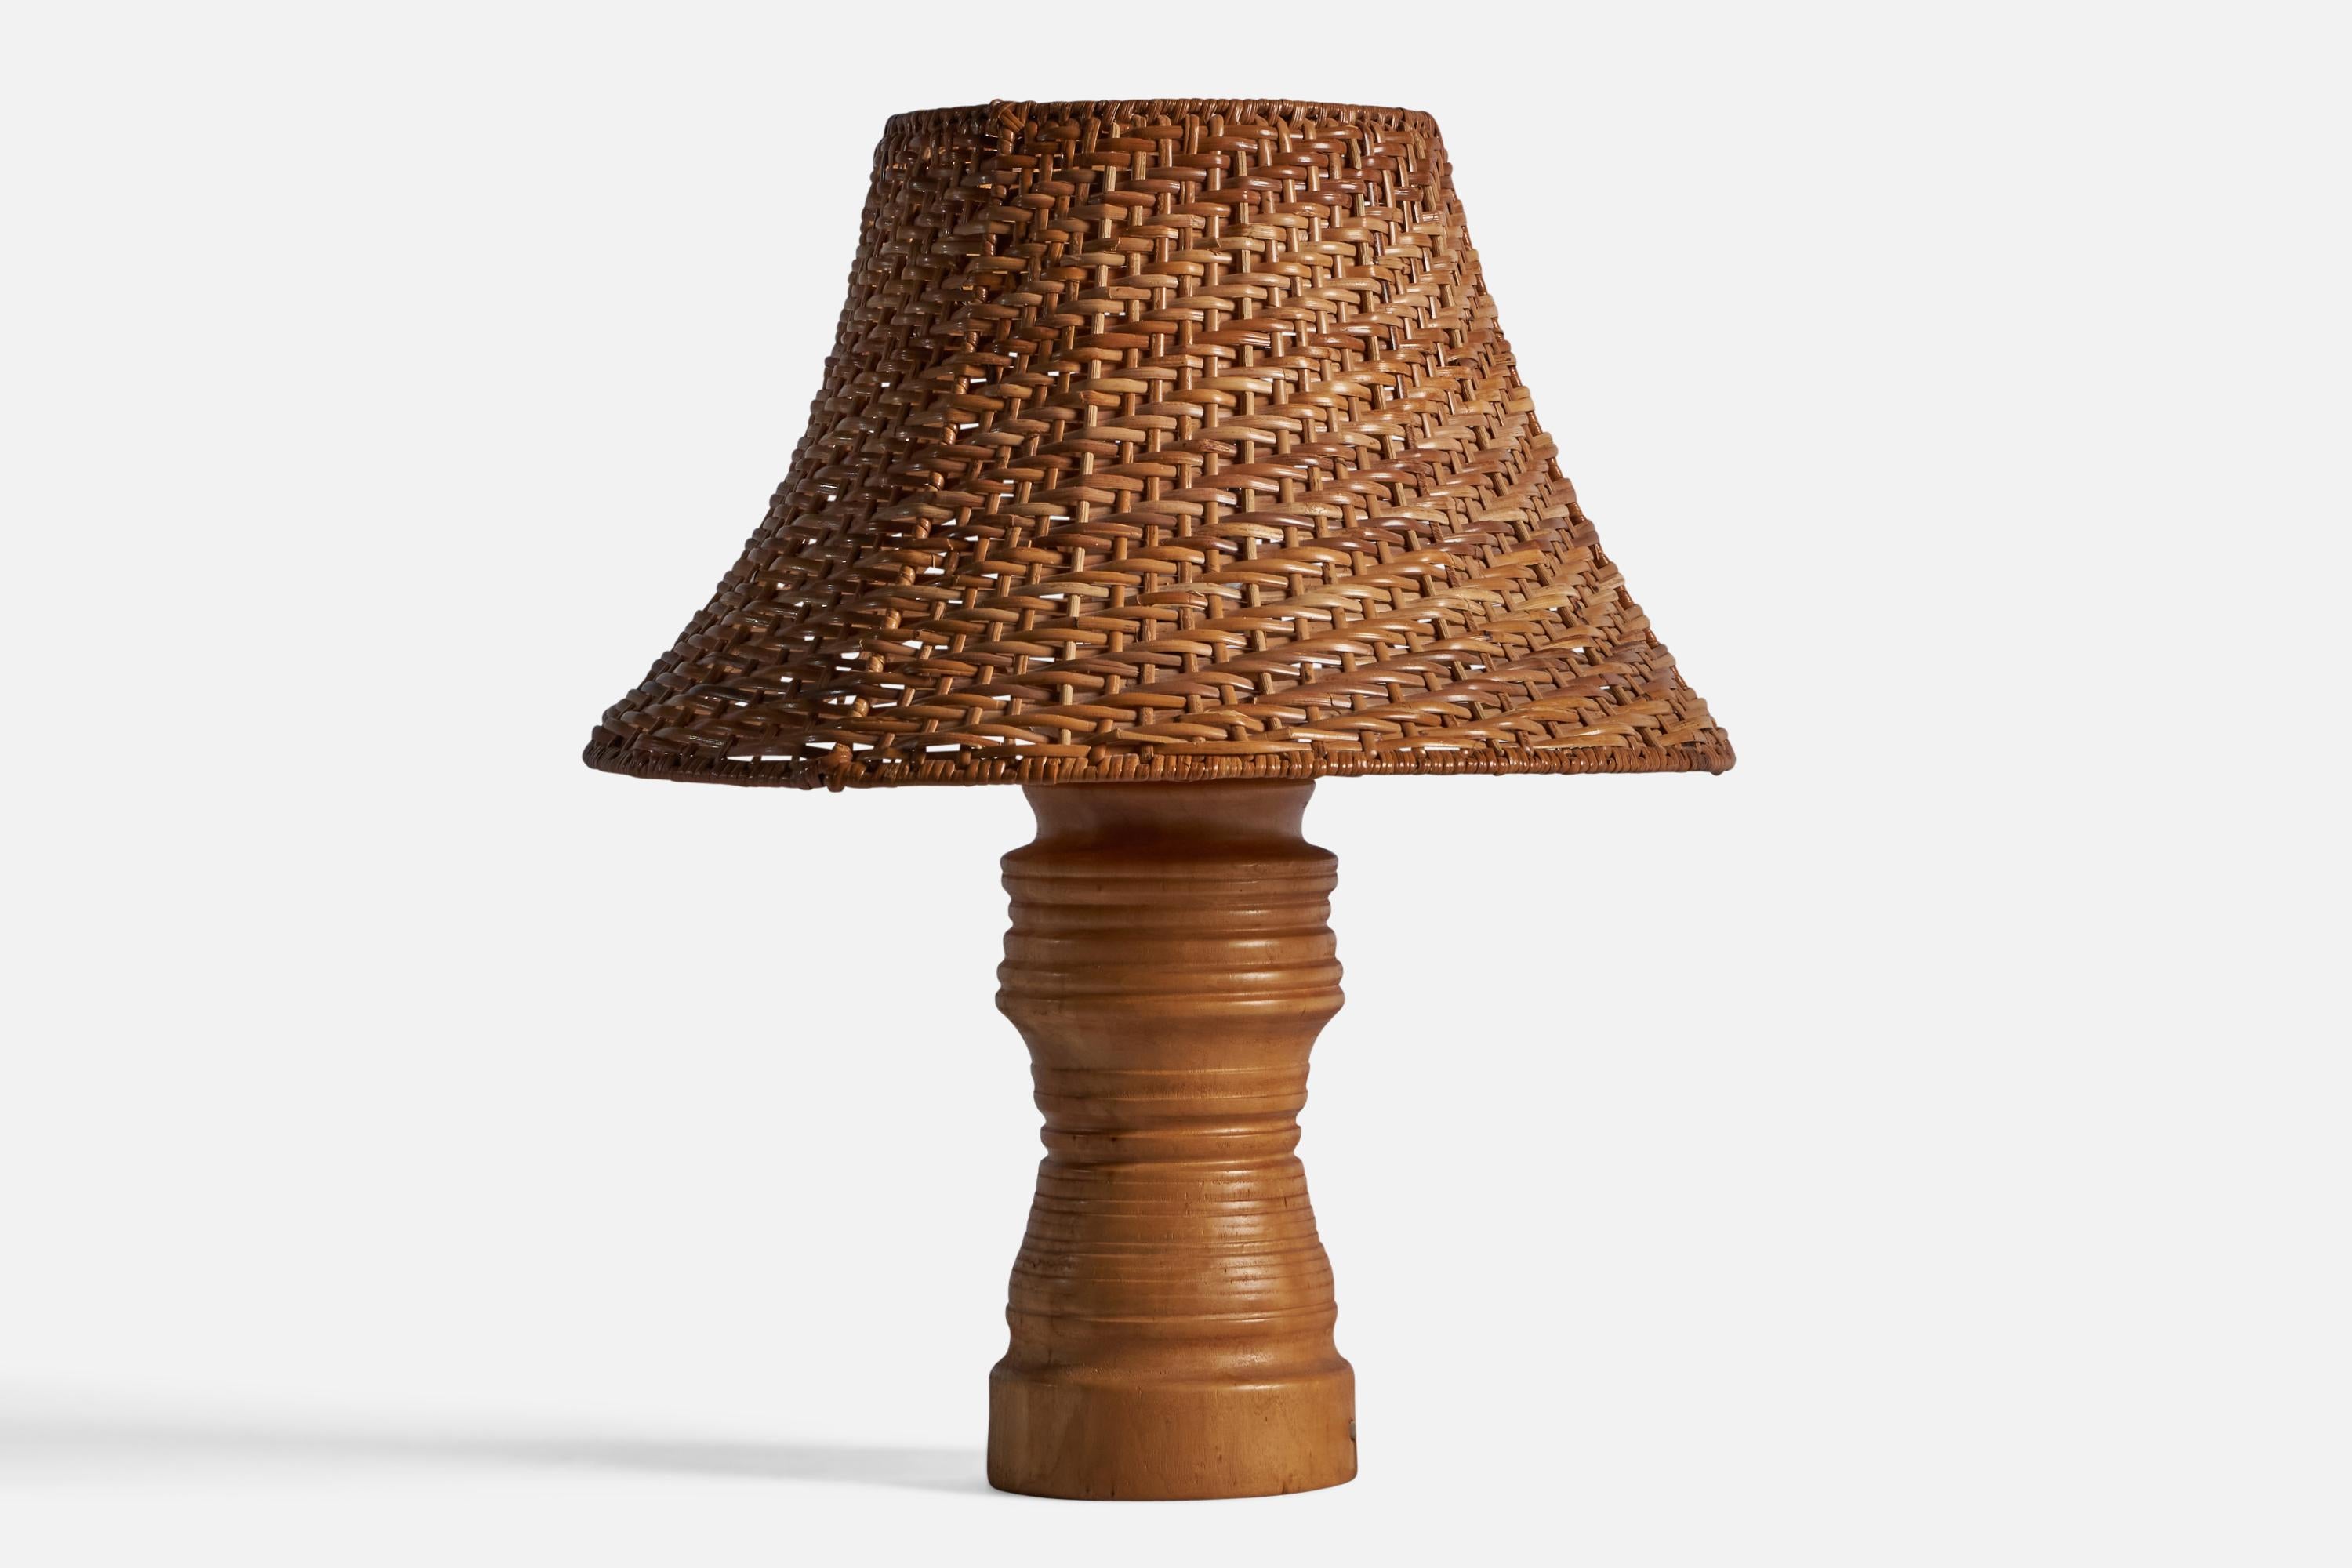 A solid turned wood and rattan table lamp designed and produced in Sweden, 1960s.

Overall Dimensions: 17.25